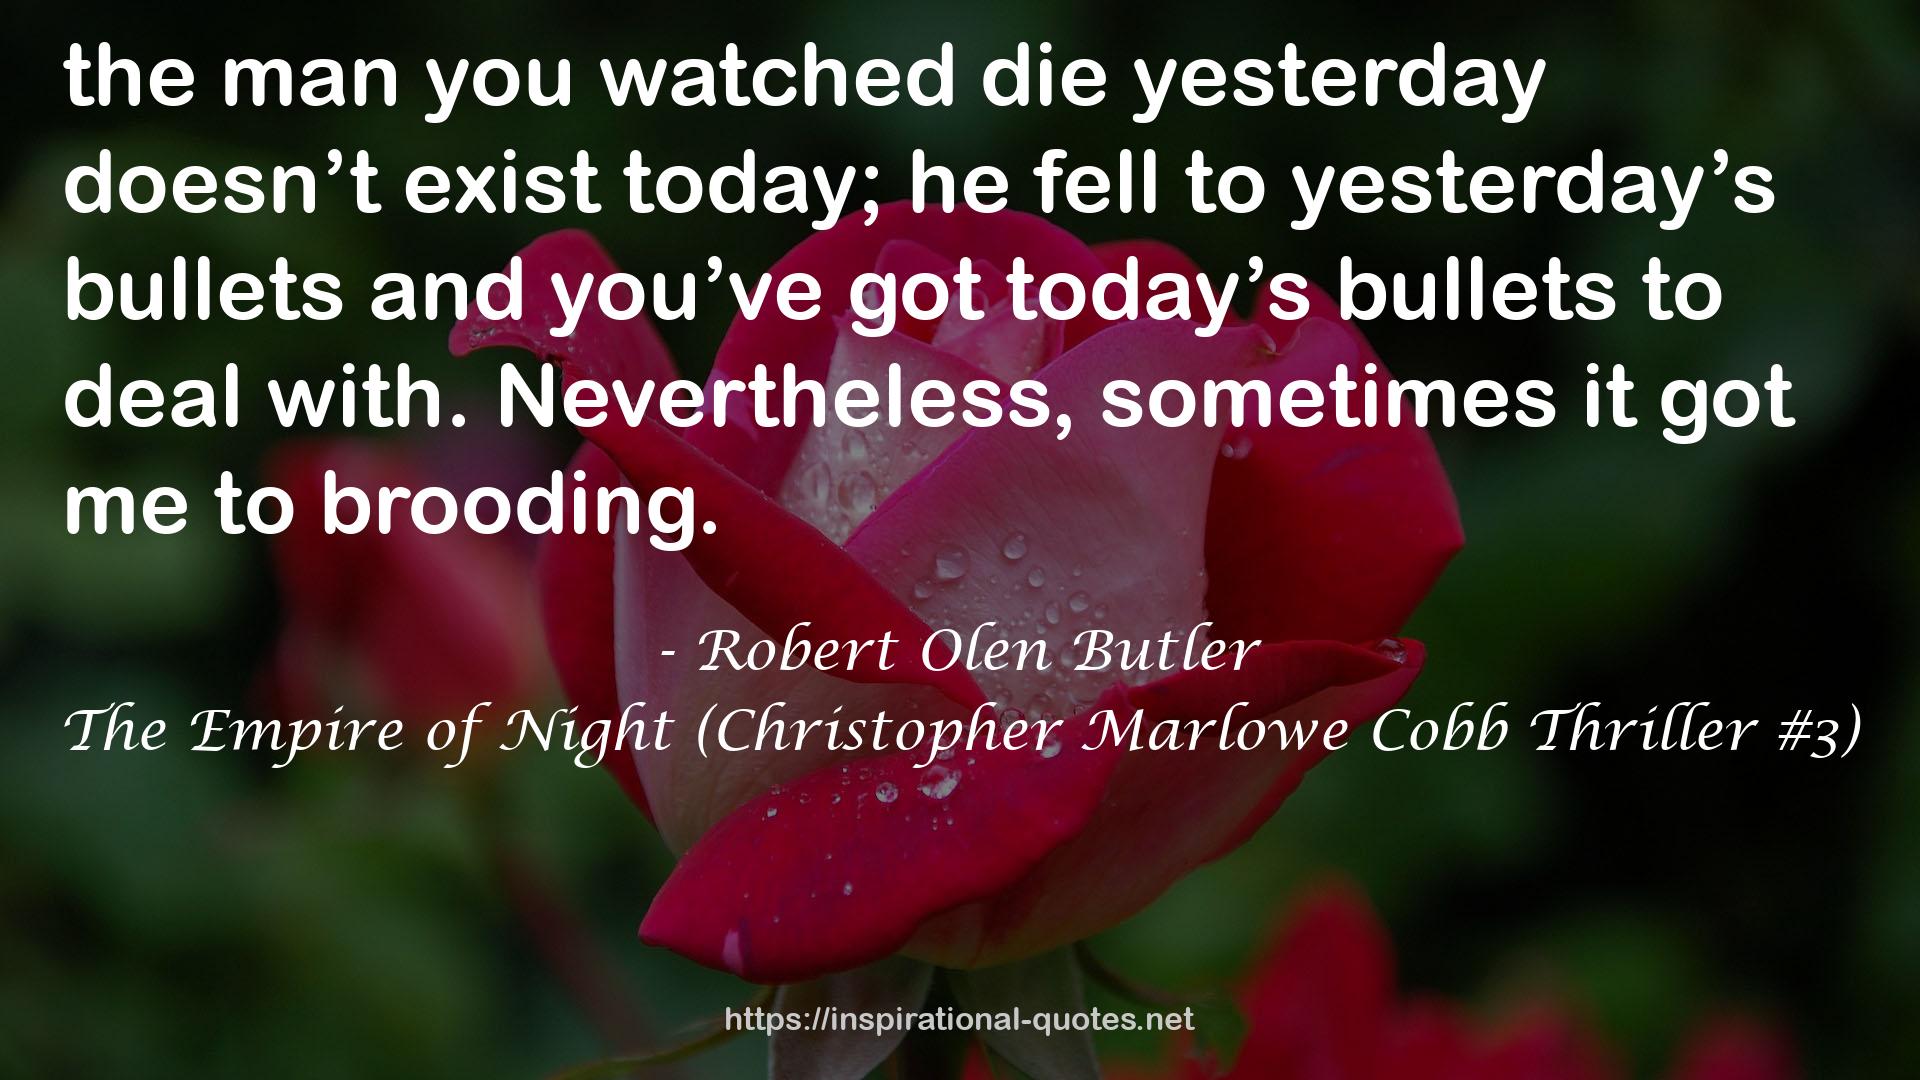 The Empire of Night (Christopher Marlowe Cobb Thriller #3) QUOTES